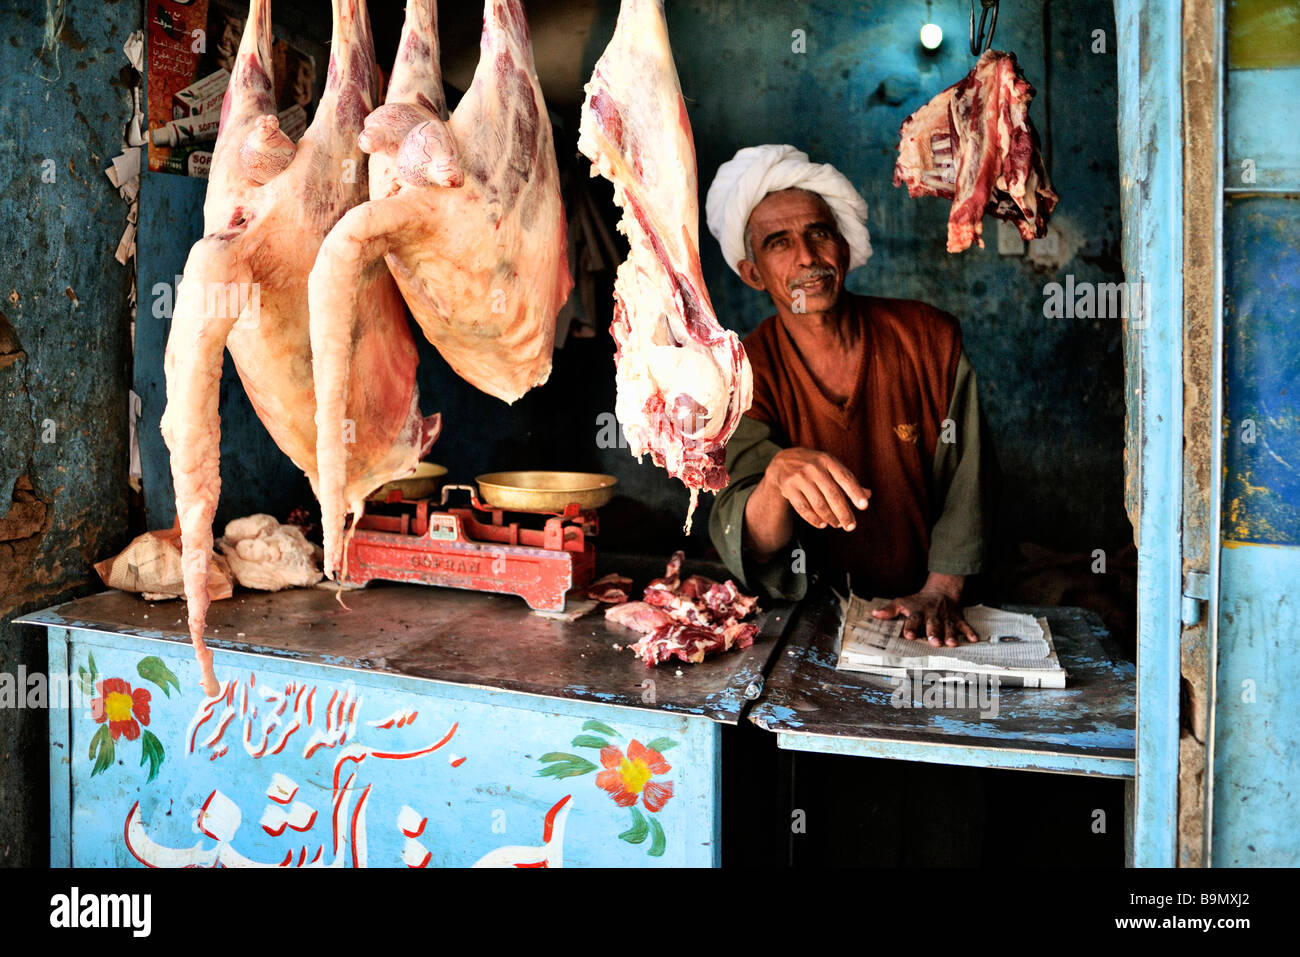 Butcher shop in town of Debba in northern Sudan, with man and sheep or goats hanging in front of shop Stock Photo